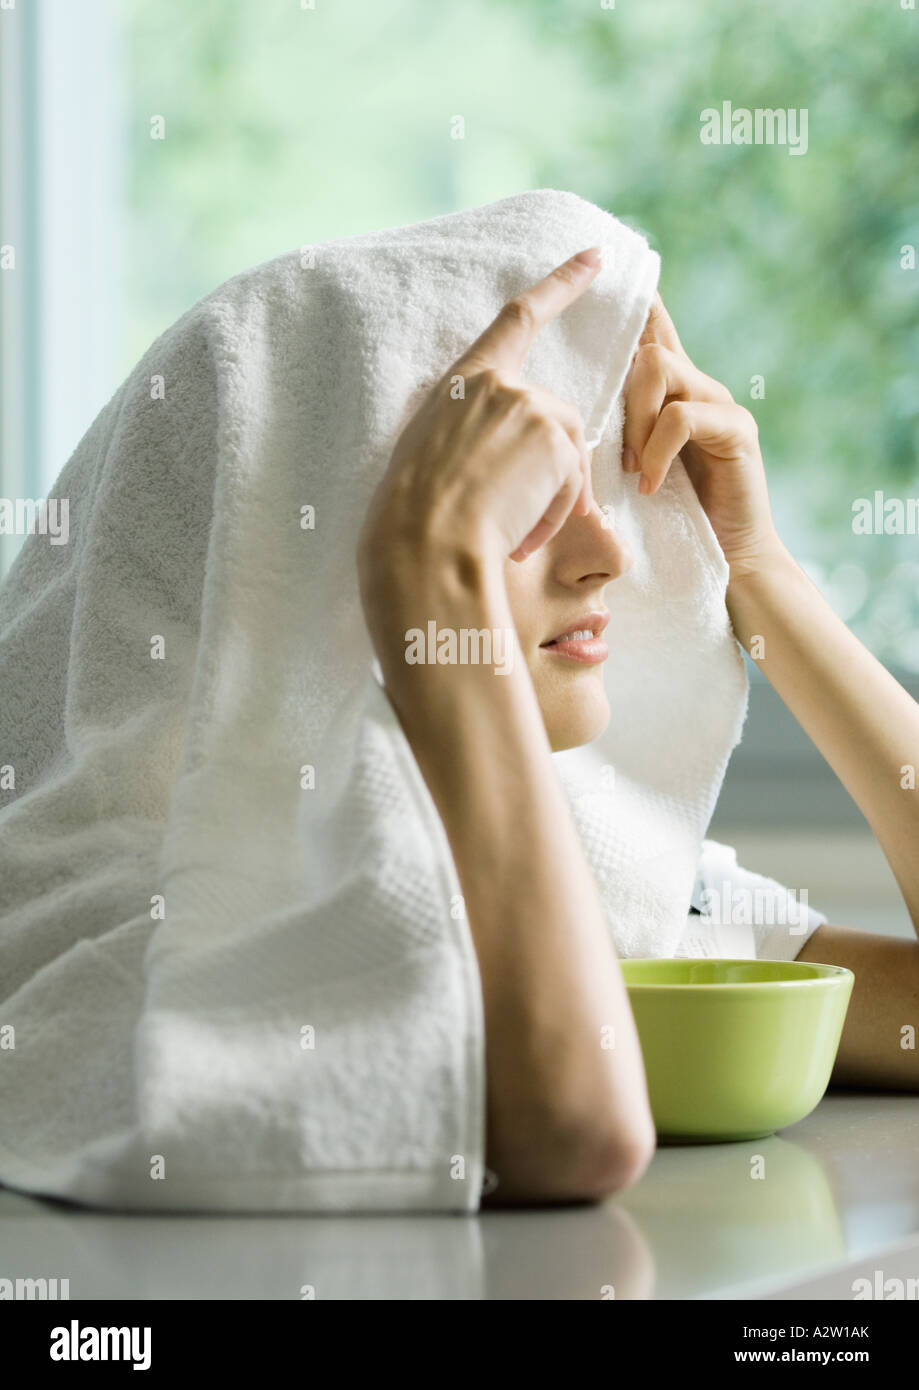 Woman with face over bowl and towel over head Stock Photo